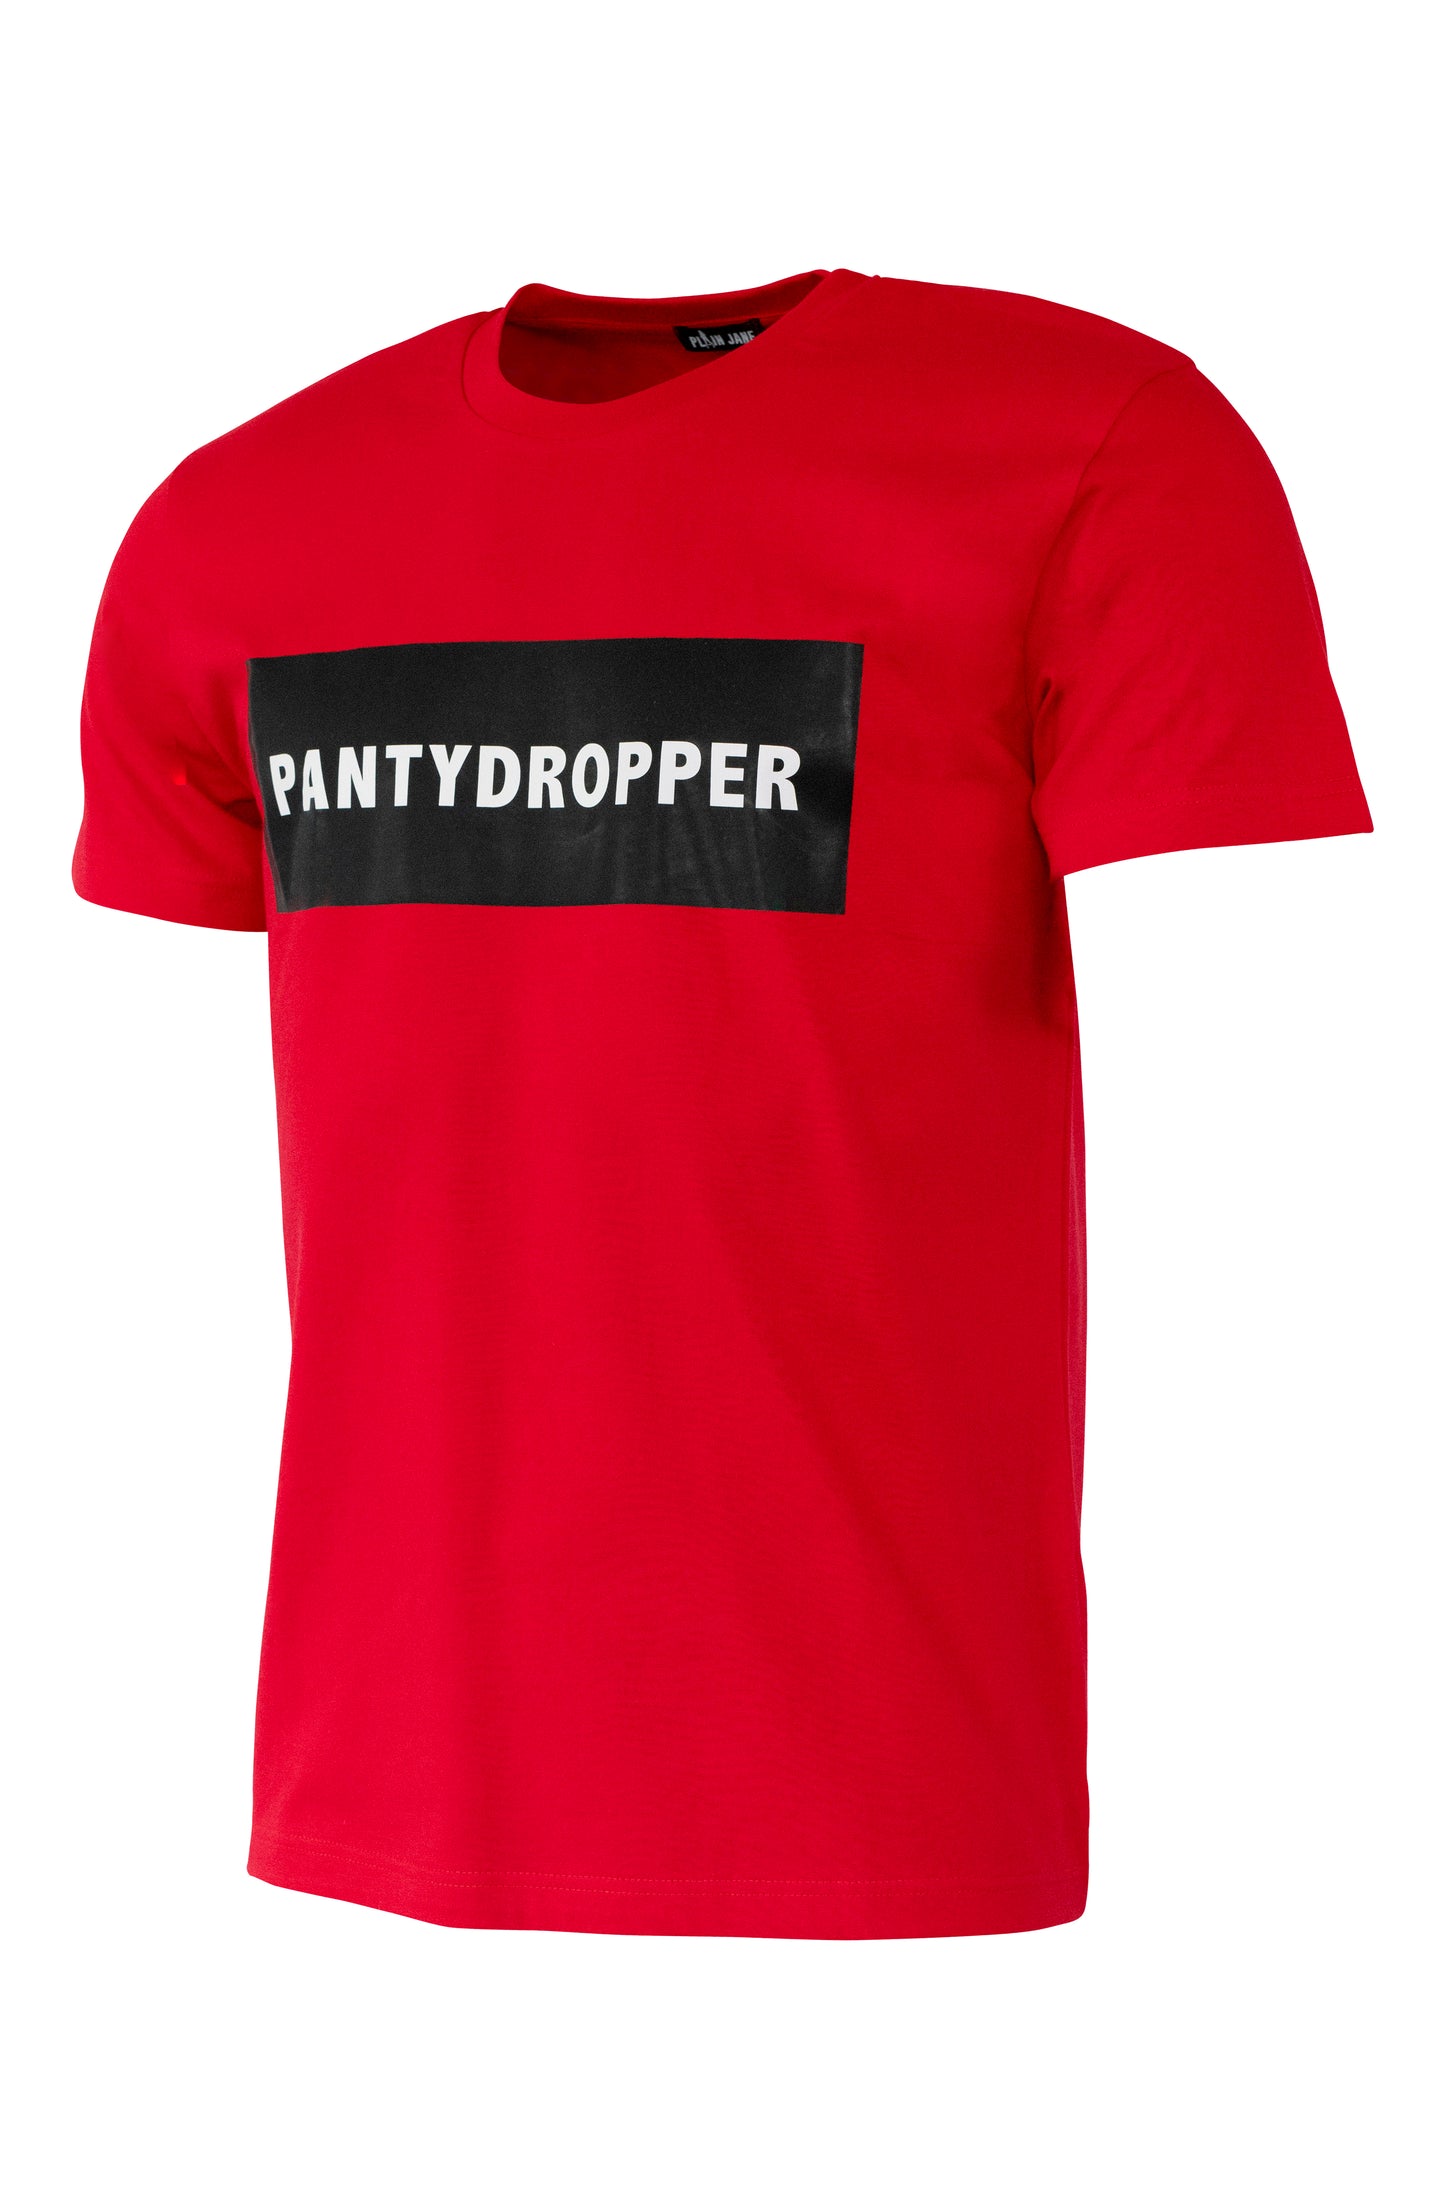 PANTYDROPPER T-SHIRT | RED